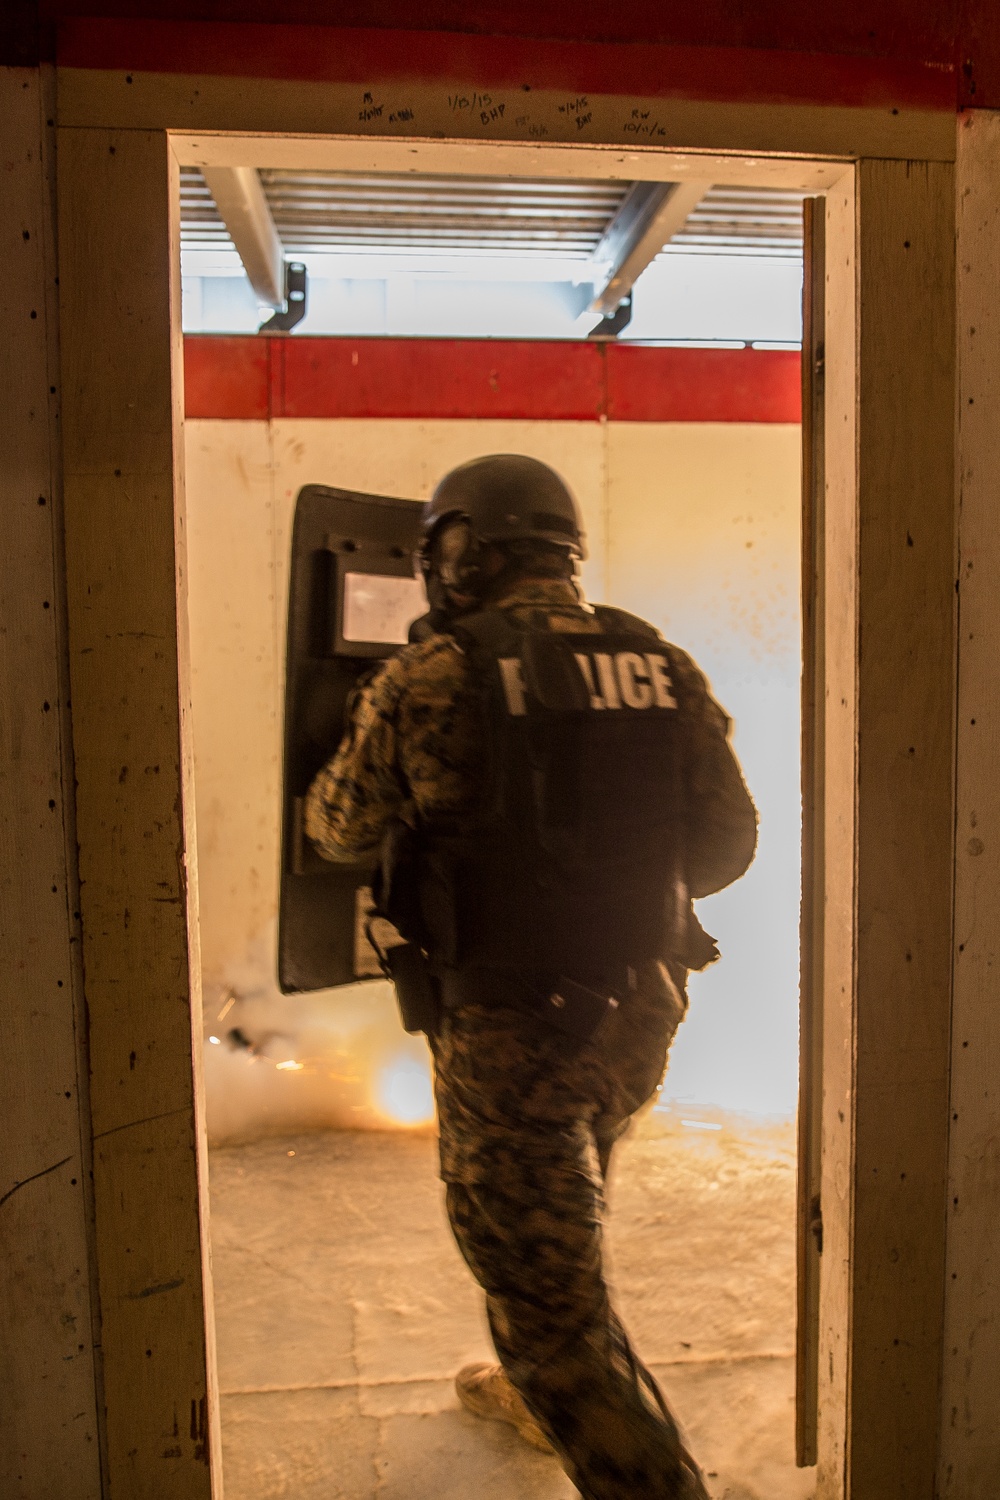 Special Reaction Team Marines train with special effects rounds